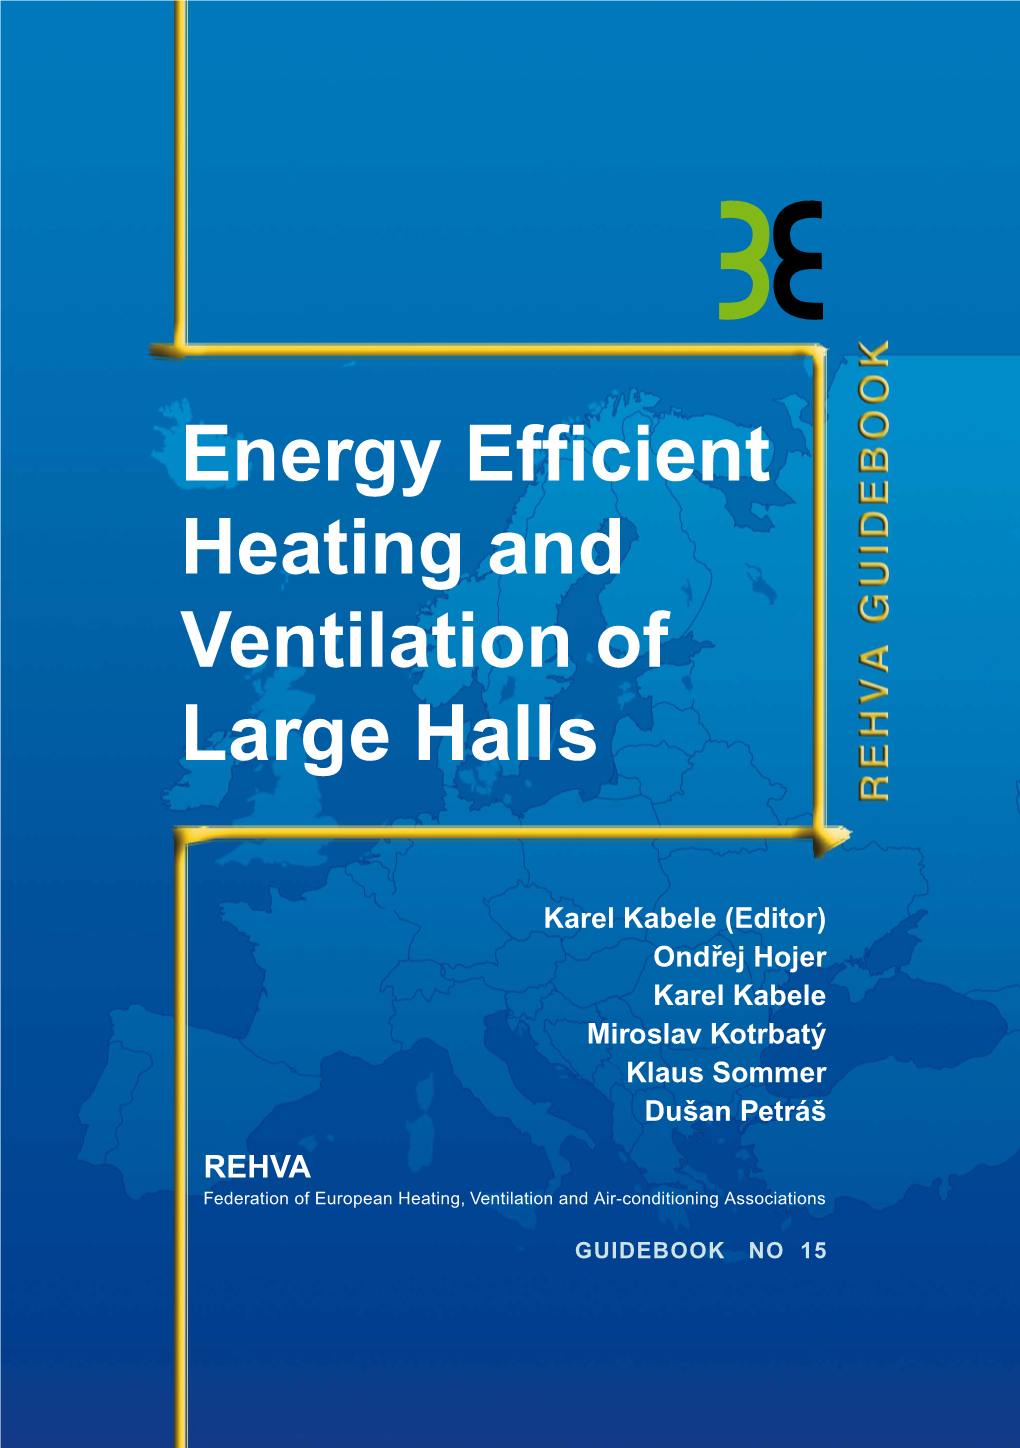 Energy Efficient Heating and Ventilation of Large Halls